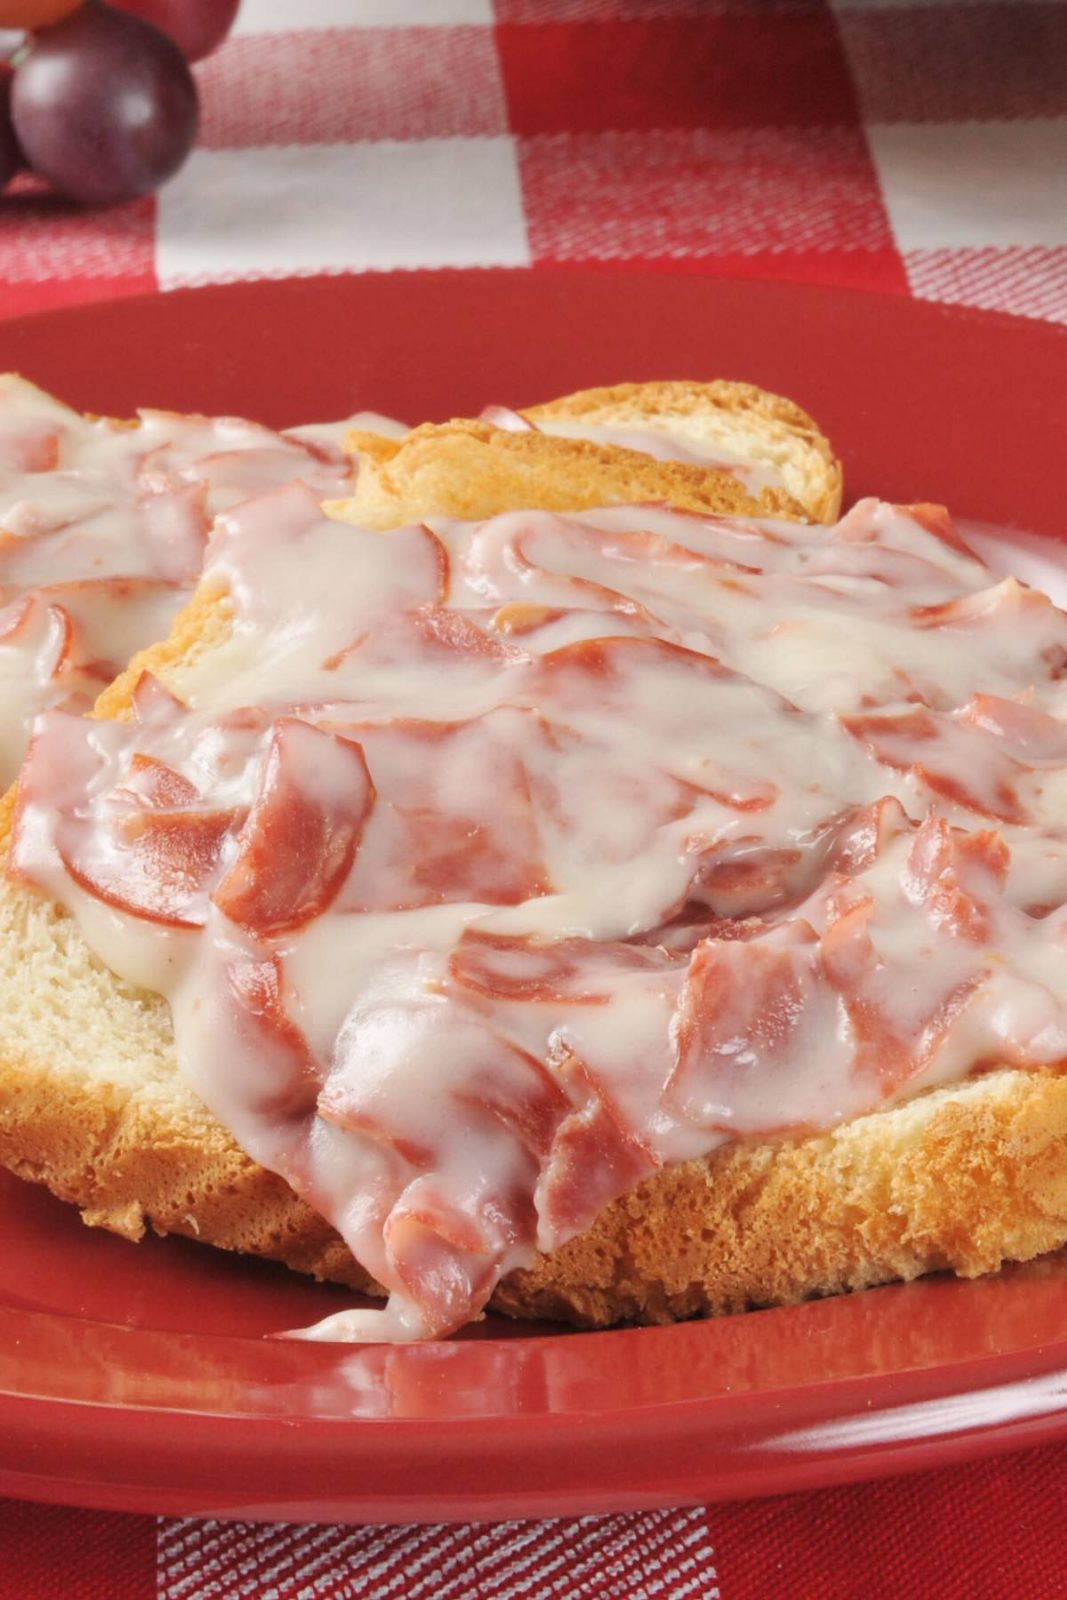 Creamed Chipped Beef is the ultimate comfort meal that’s fast and inexpensive. We often make this for a quick breakfast, lunch or light dinner. This is a classic American military dish made with creamed chipped beef, and served over toast.